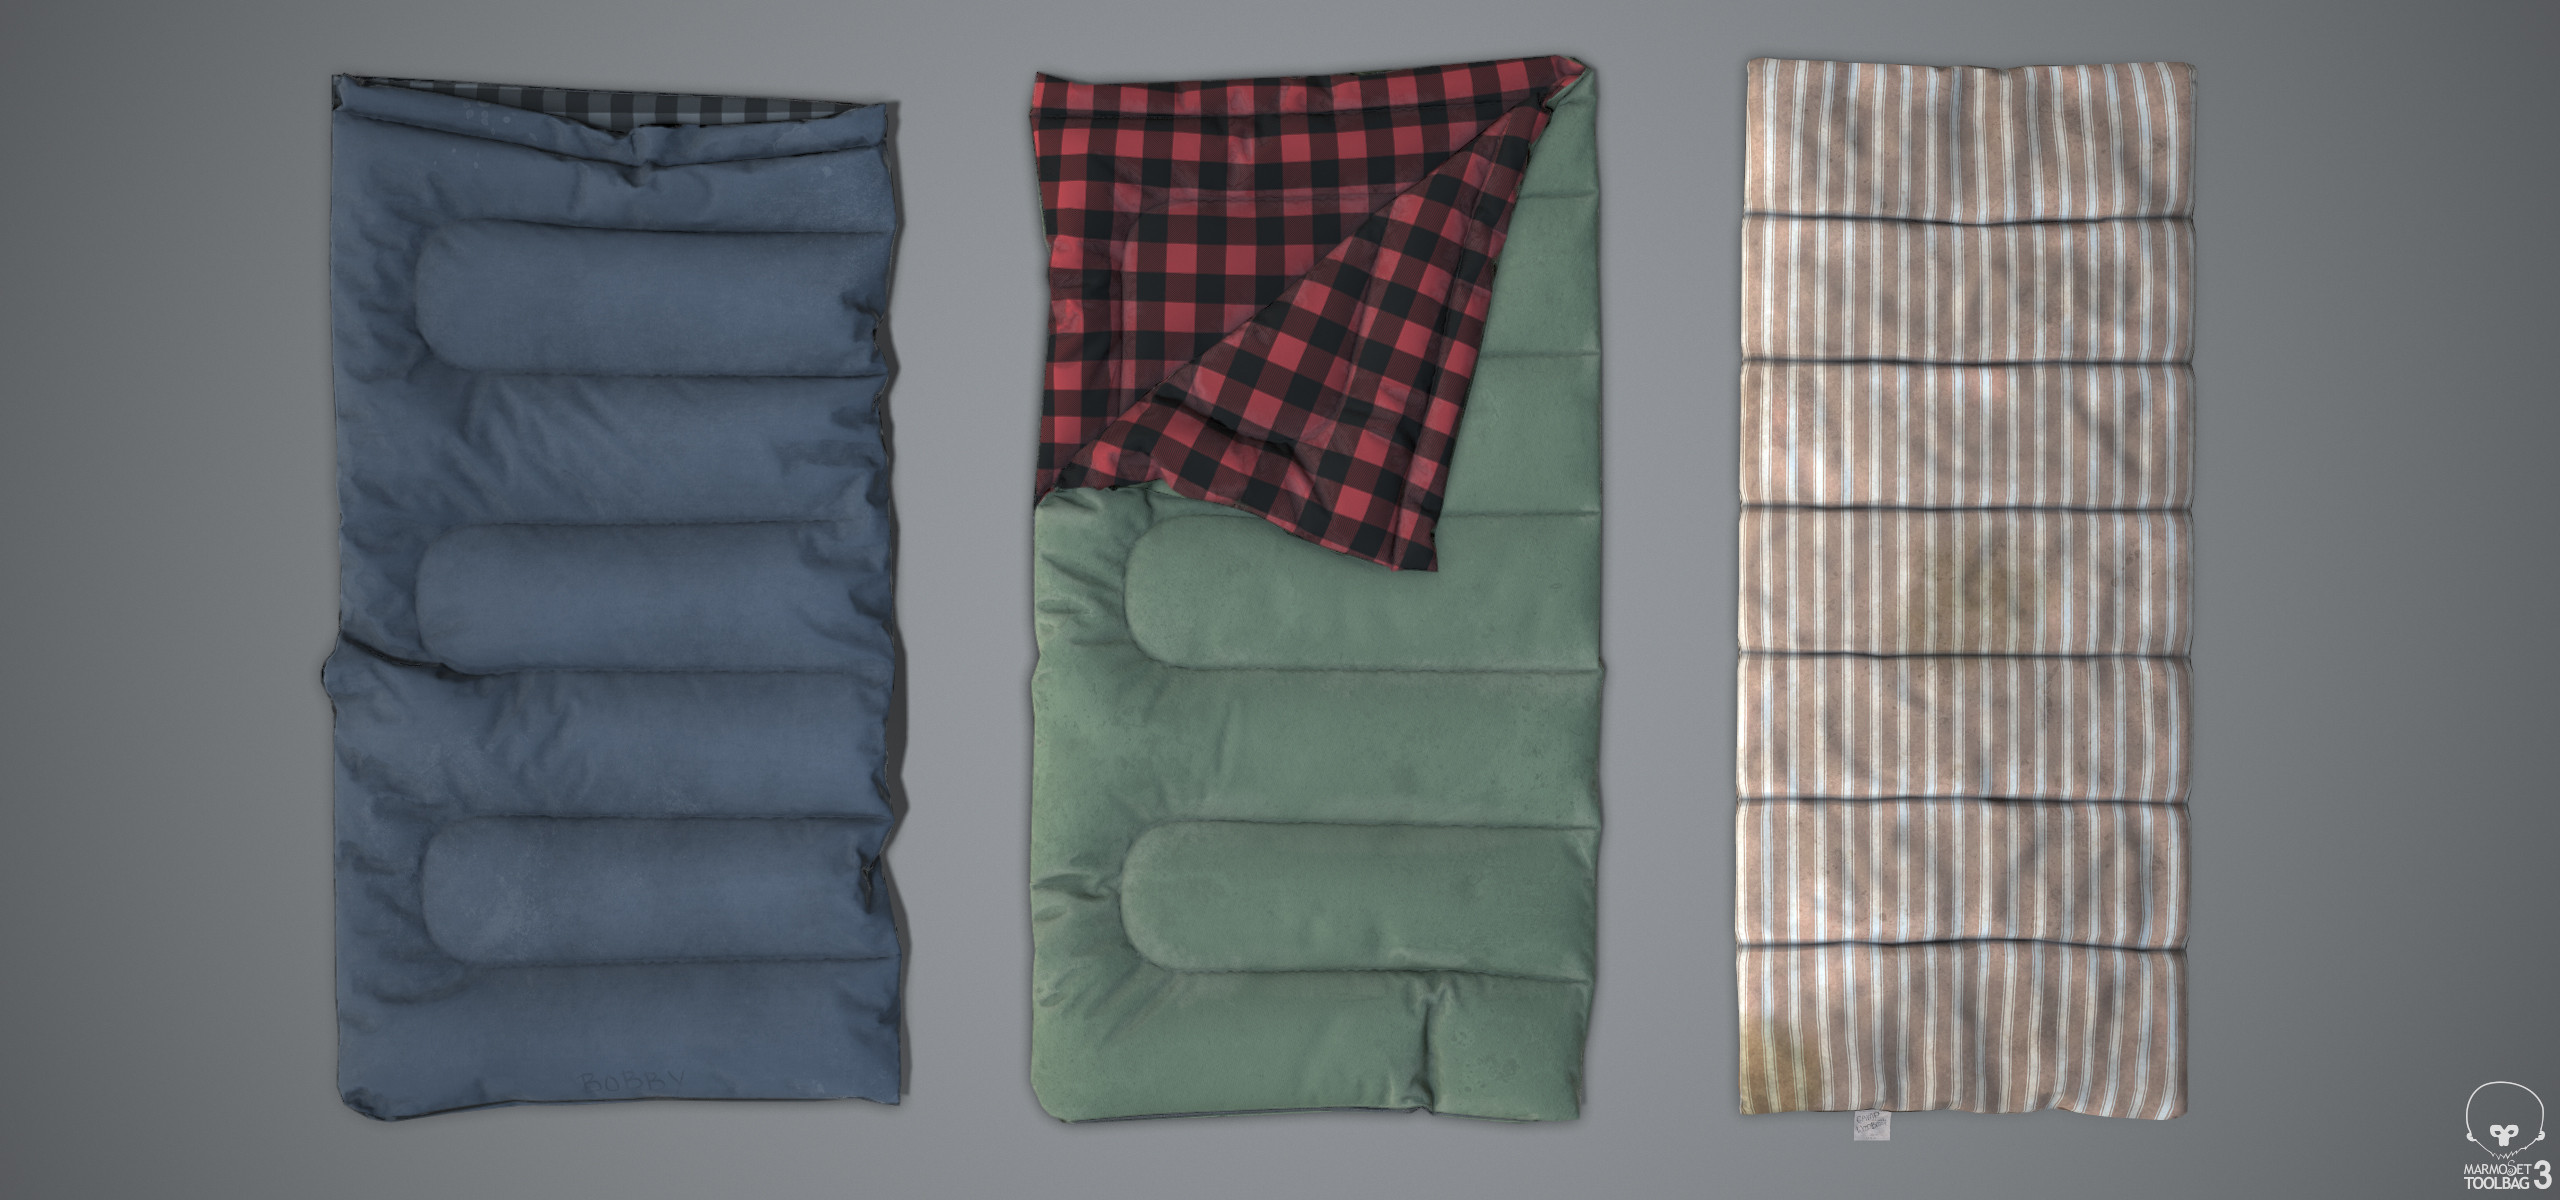 Made with Marvelous Designer : Fabric Materials made with Adobe Illustrator &amp; Substance Designer. 